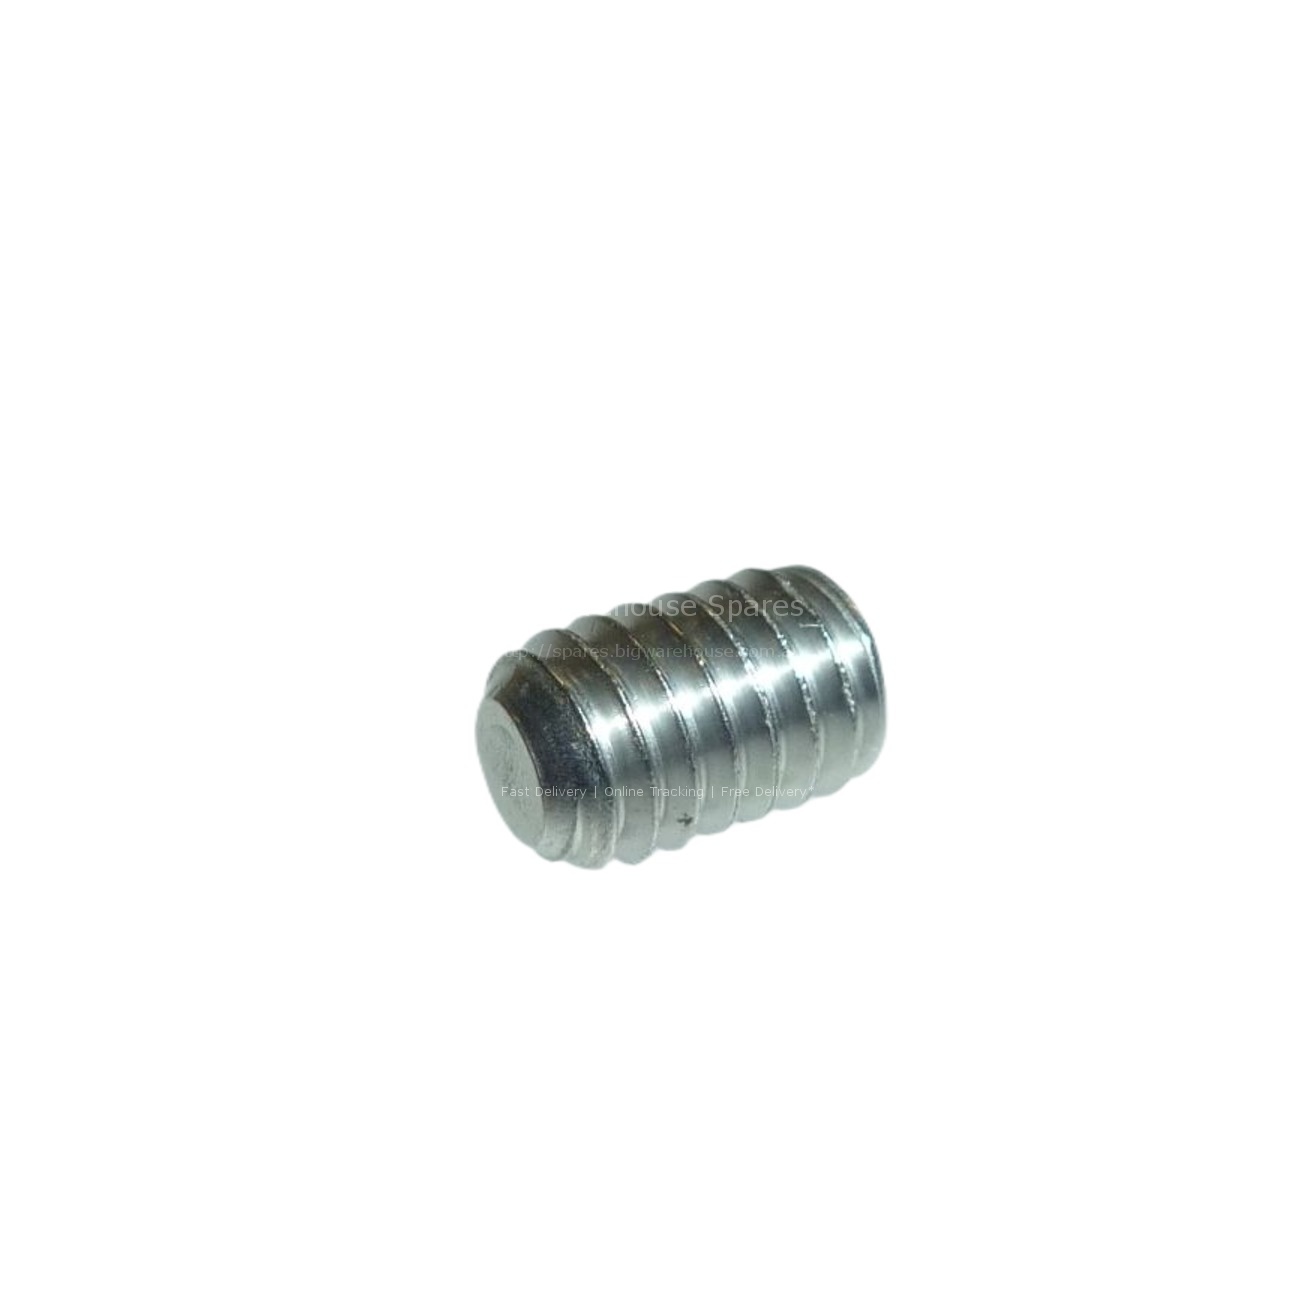 SCREW WITHOUT HEAD - HEXAGONAL GROOVE M4